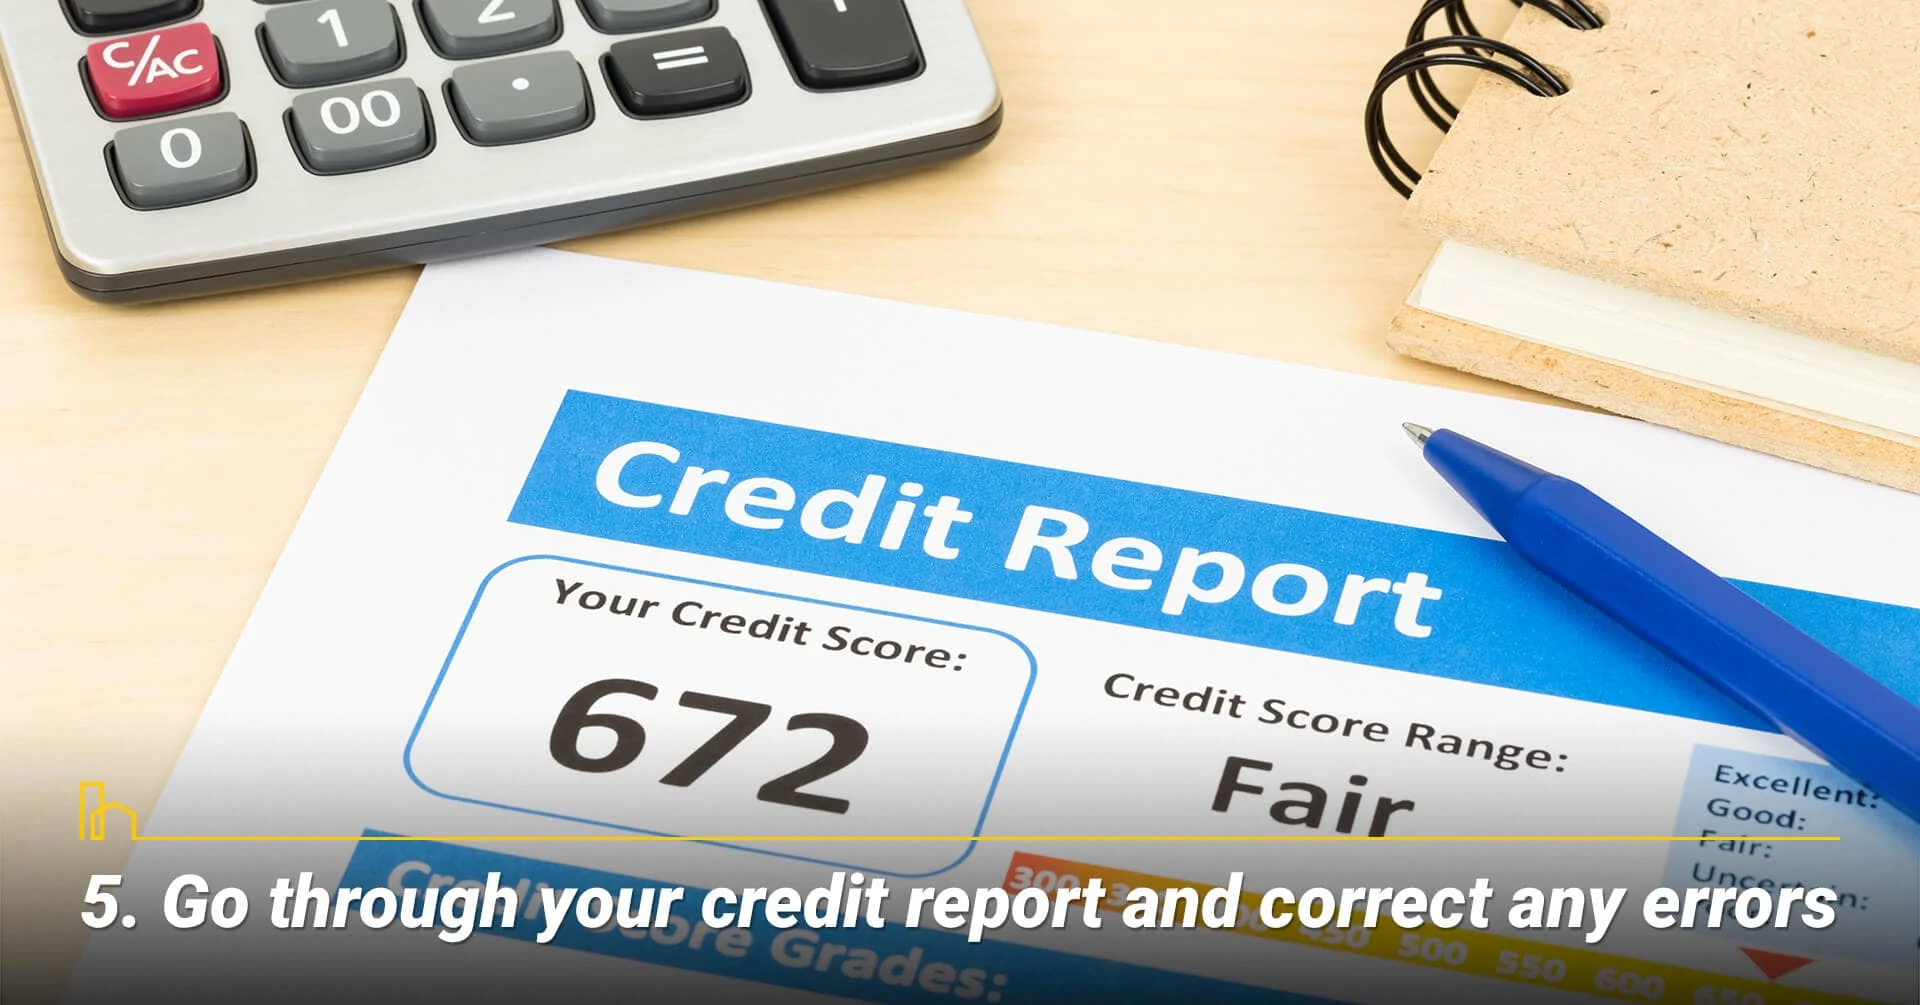 Go through your credit report and correct any errors, clean up errors in your credit report